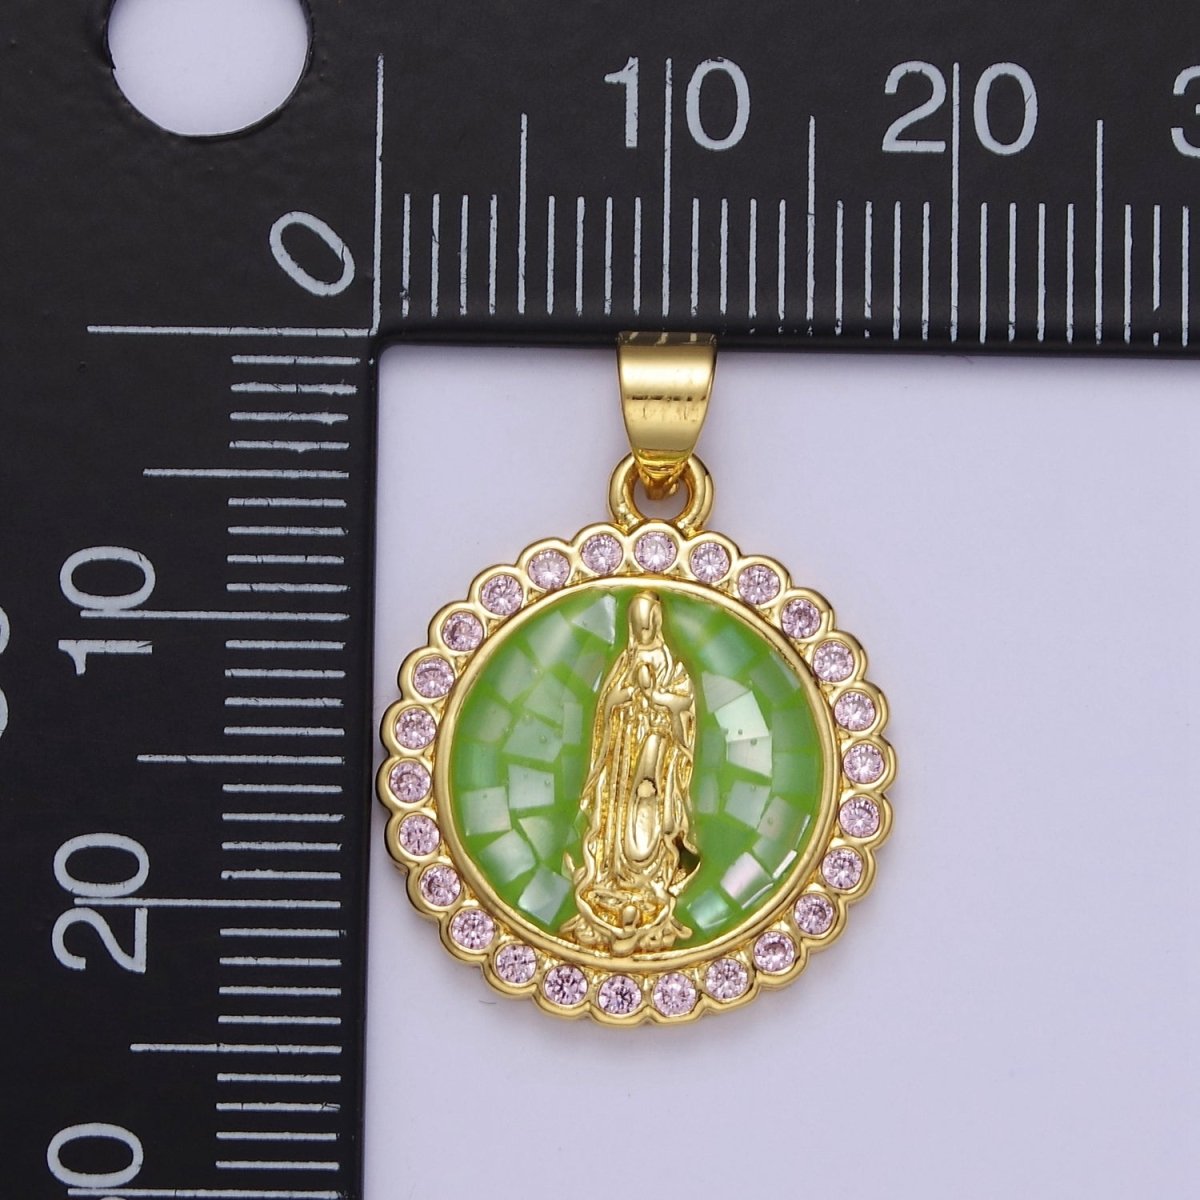 Pink Opal Lady Guadalupe Charm for Necklace, Dainty Coin Virgin Mary Pendant for Religious Jewelry Making Supply in Gold Filled J-494 J-495 J-505 J-509 - DLUXCA